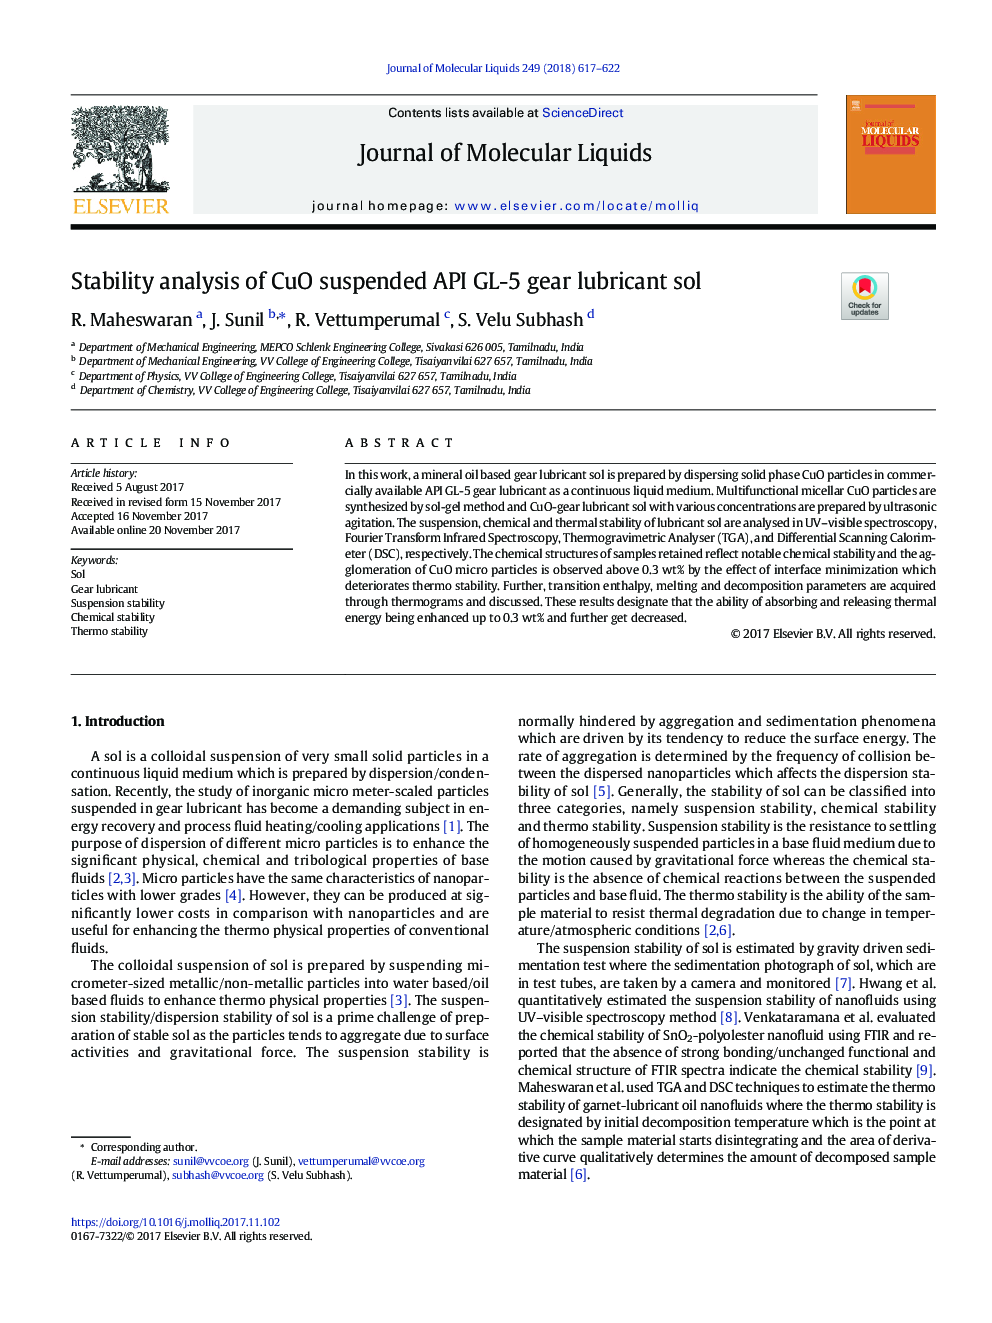 Stability analysis of CuO suspended API GL-5 gear lubricant sol